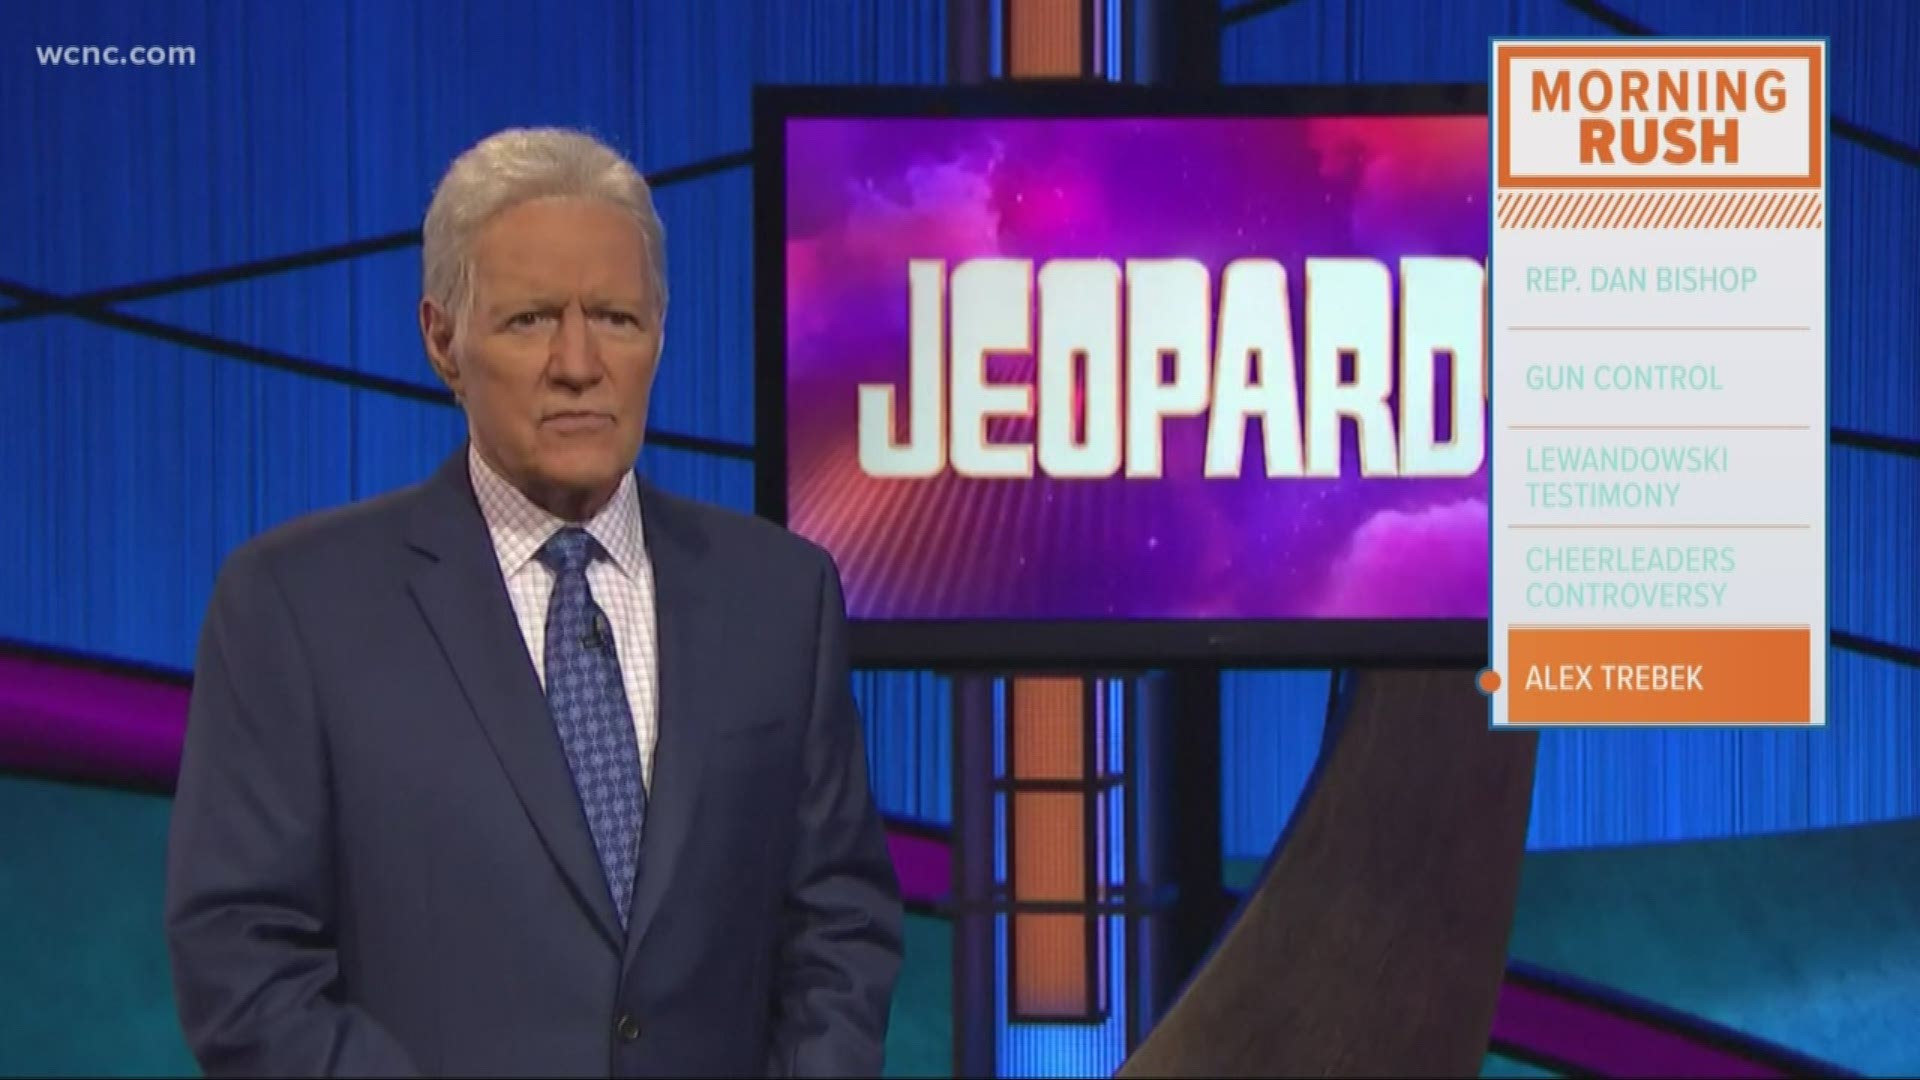 Iconic "Jeopardy!" host Alex Trebek announced he is undergoing another round of chemotherapy after experiencing a setback shortly after his first round of treatment for Stage 4 pancreatic cancer.